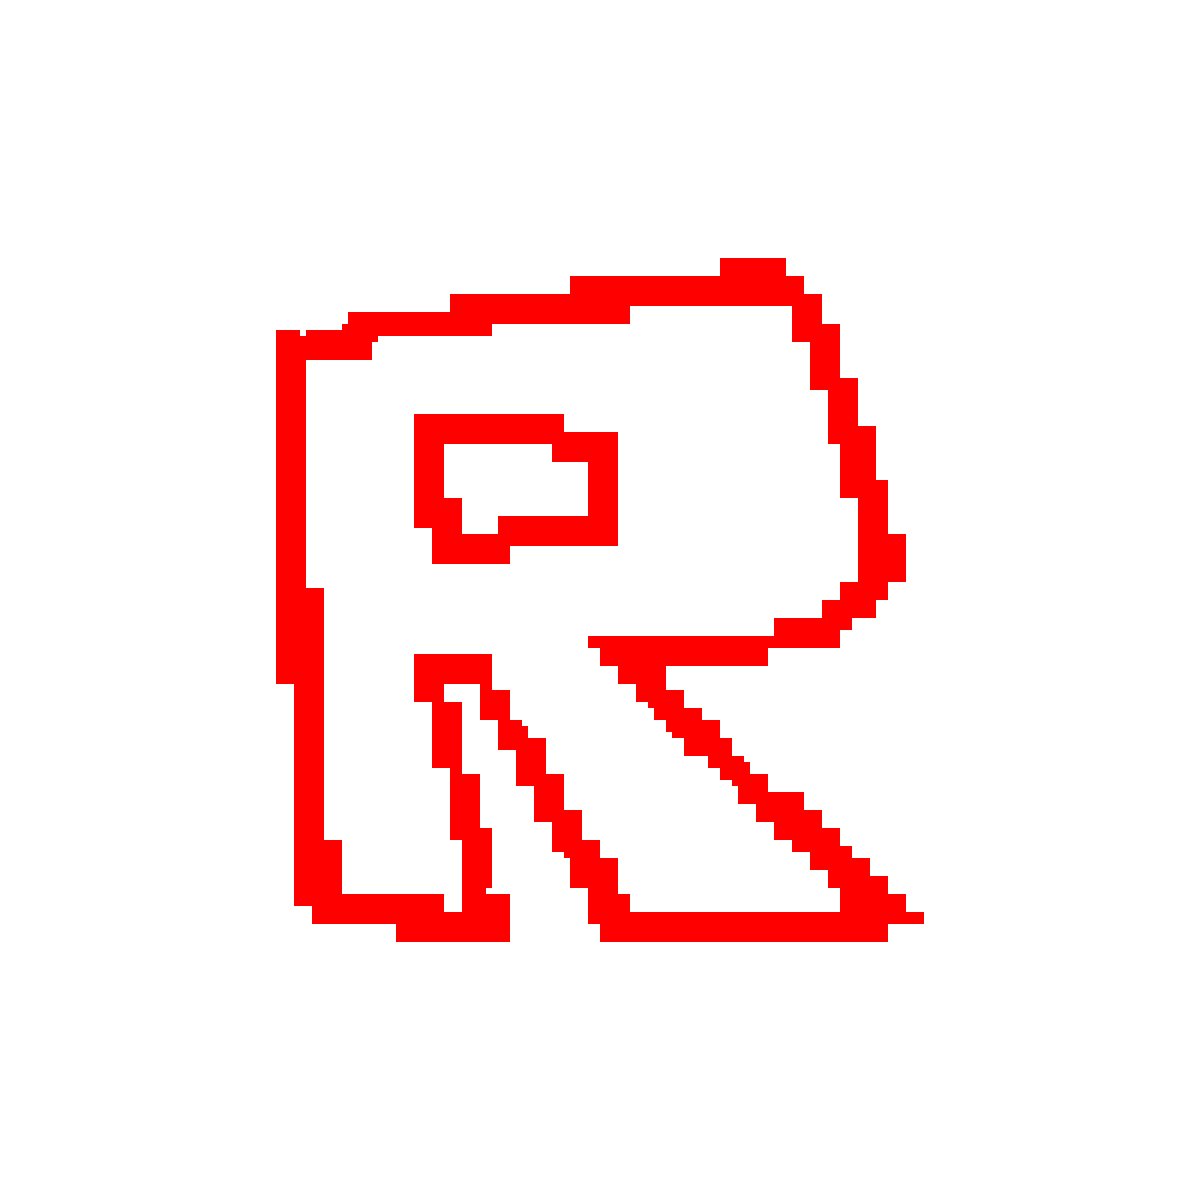 Images Of The Roblox Logo Generation